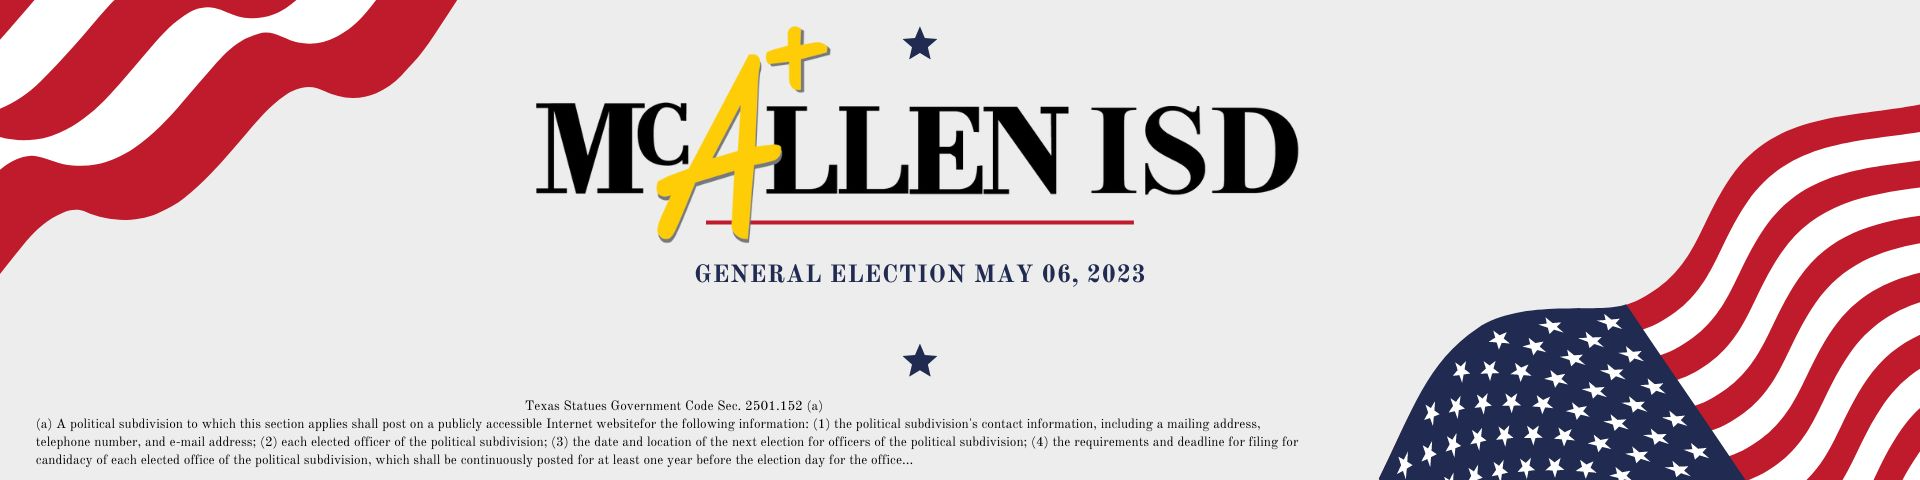 McAllen ISD General Election May 06, 2023 Photo